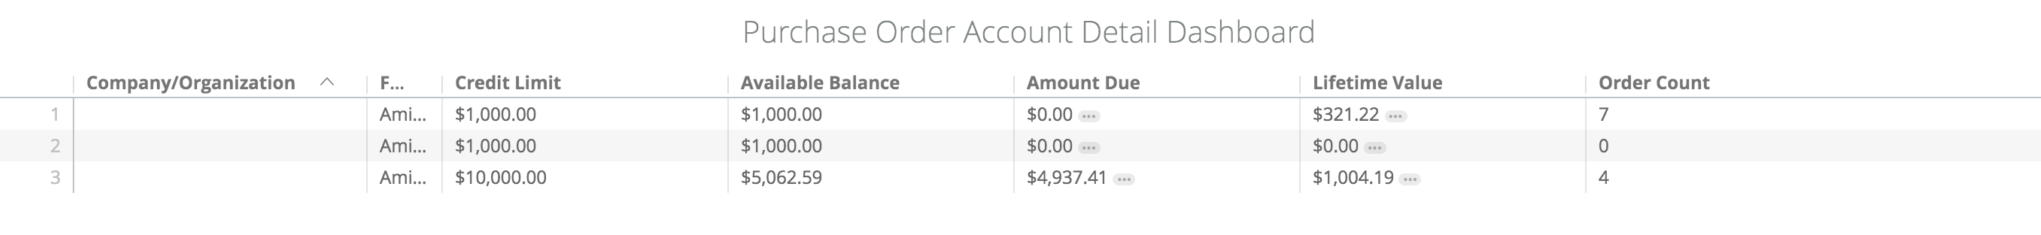 Example of the Purchase Order Account Details dashboard with a table of purchase order details